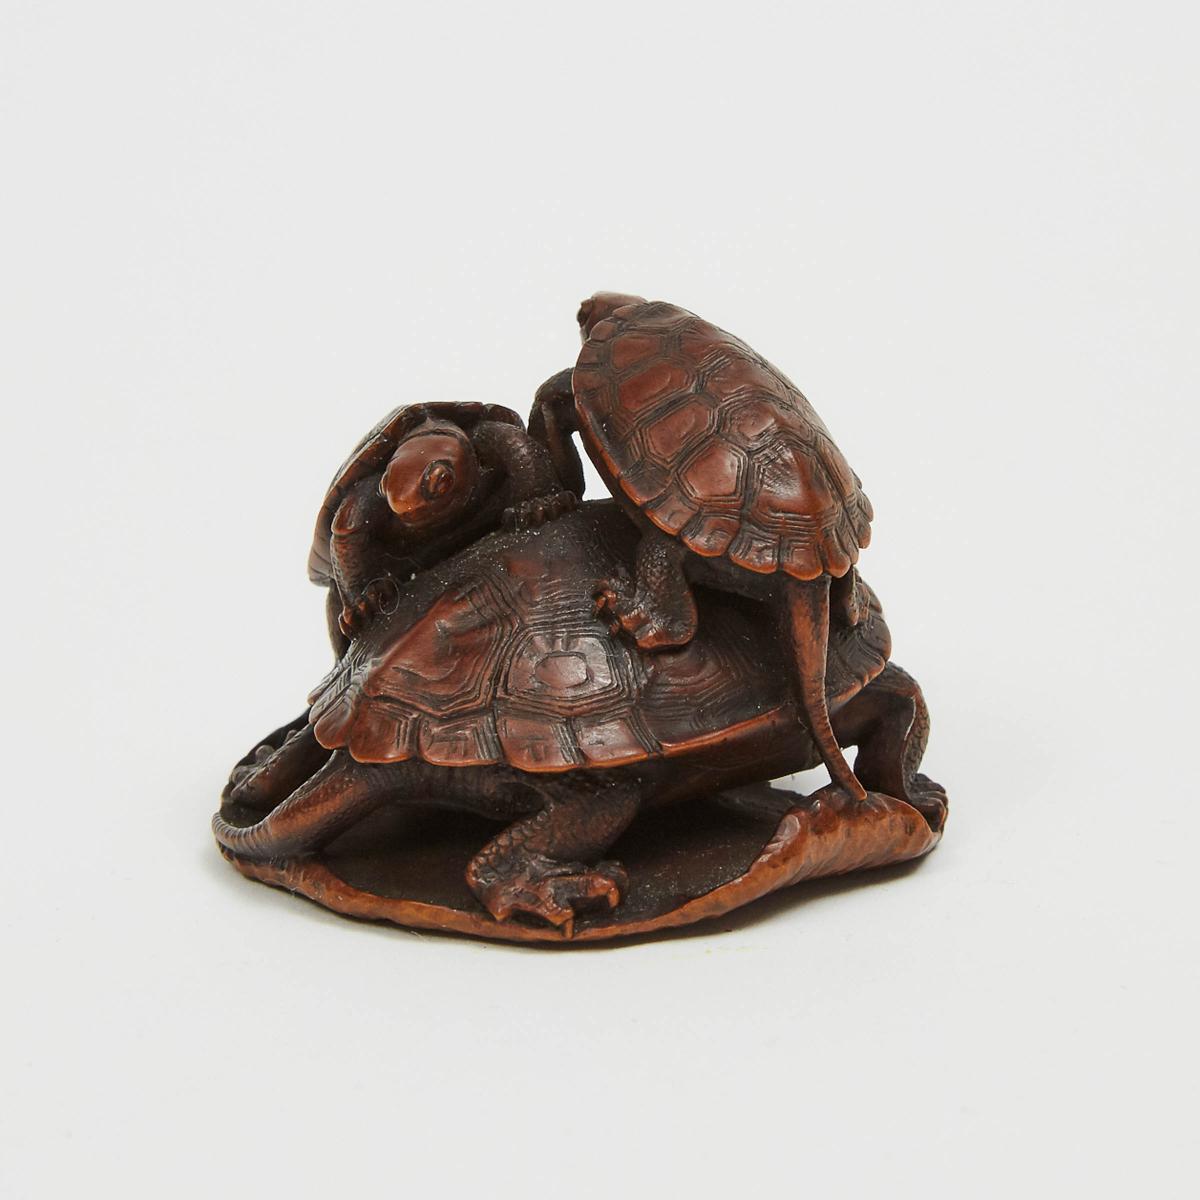 A Boxwood Netsuke of Turtles, Signed Bazan, 19th Century, 1.4 x 2 in — 3.6 x 5 cm - Image 2 of 4